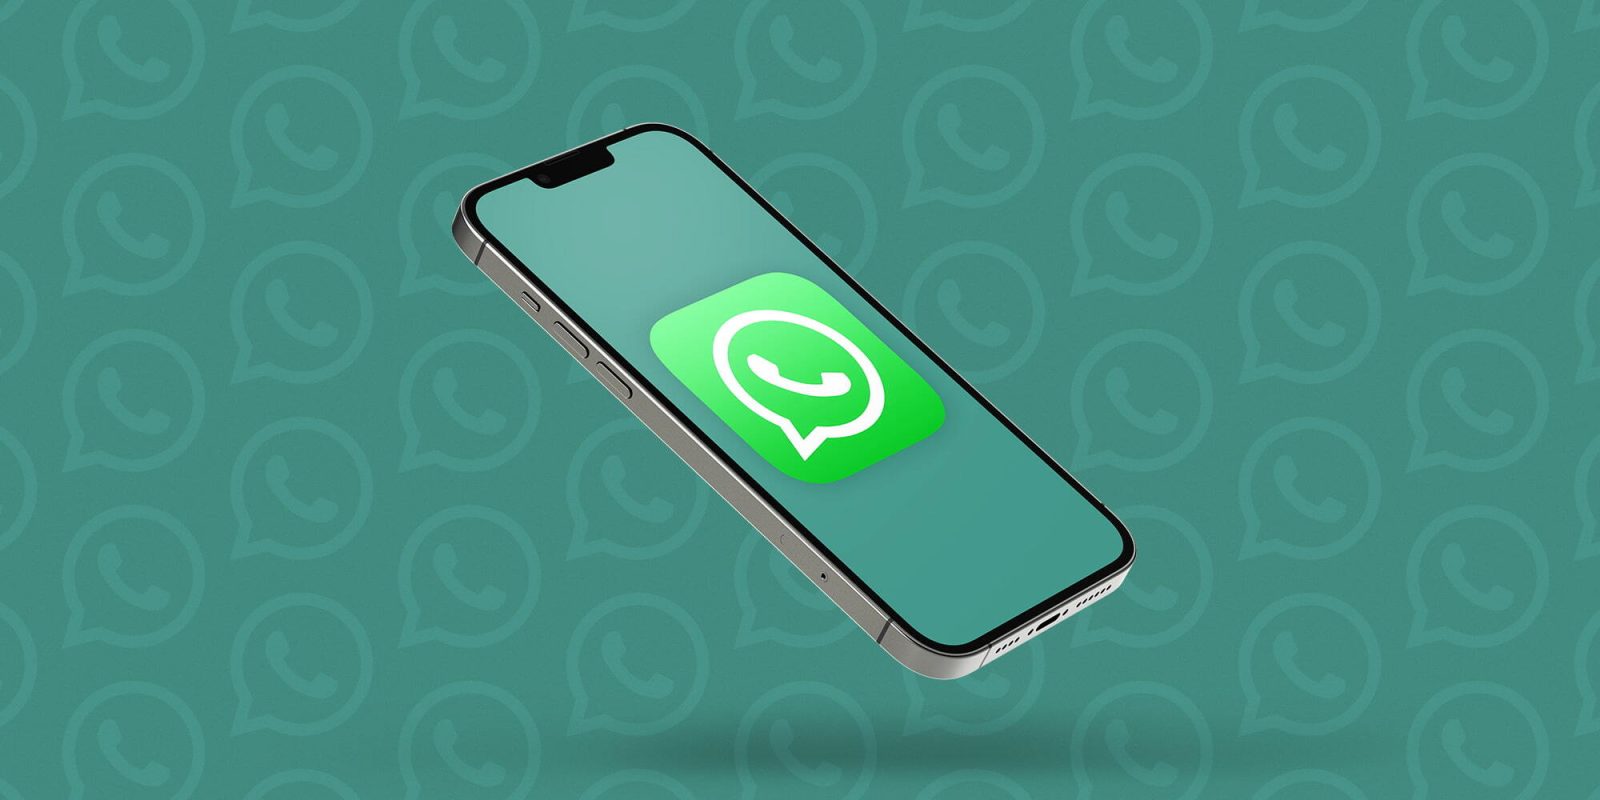 Whatsapp bringing passkey support to its iphone app